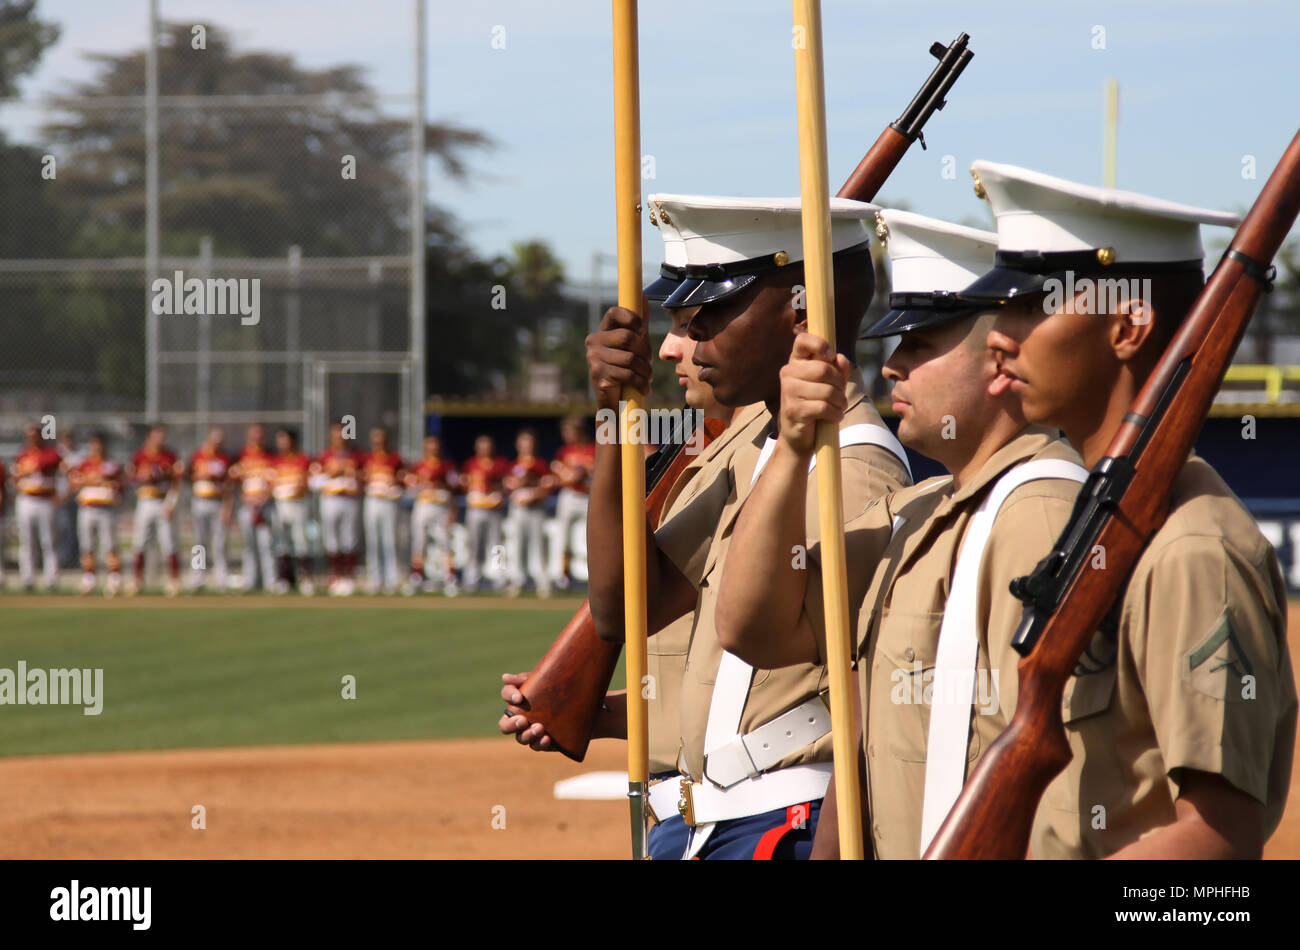 Left to right, Marine Corps Recruiters Sgt. Berrian Macon, Sgt. Victor Romualdo and LCpl. Ulixes Hernandez, present colors during a during a varsity baseball game at St. John Bosco High School, Bellflower, Calif., March 14, 2017. Stock Photo